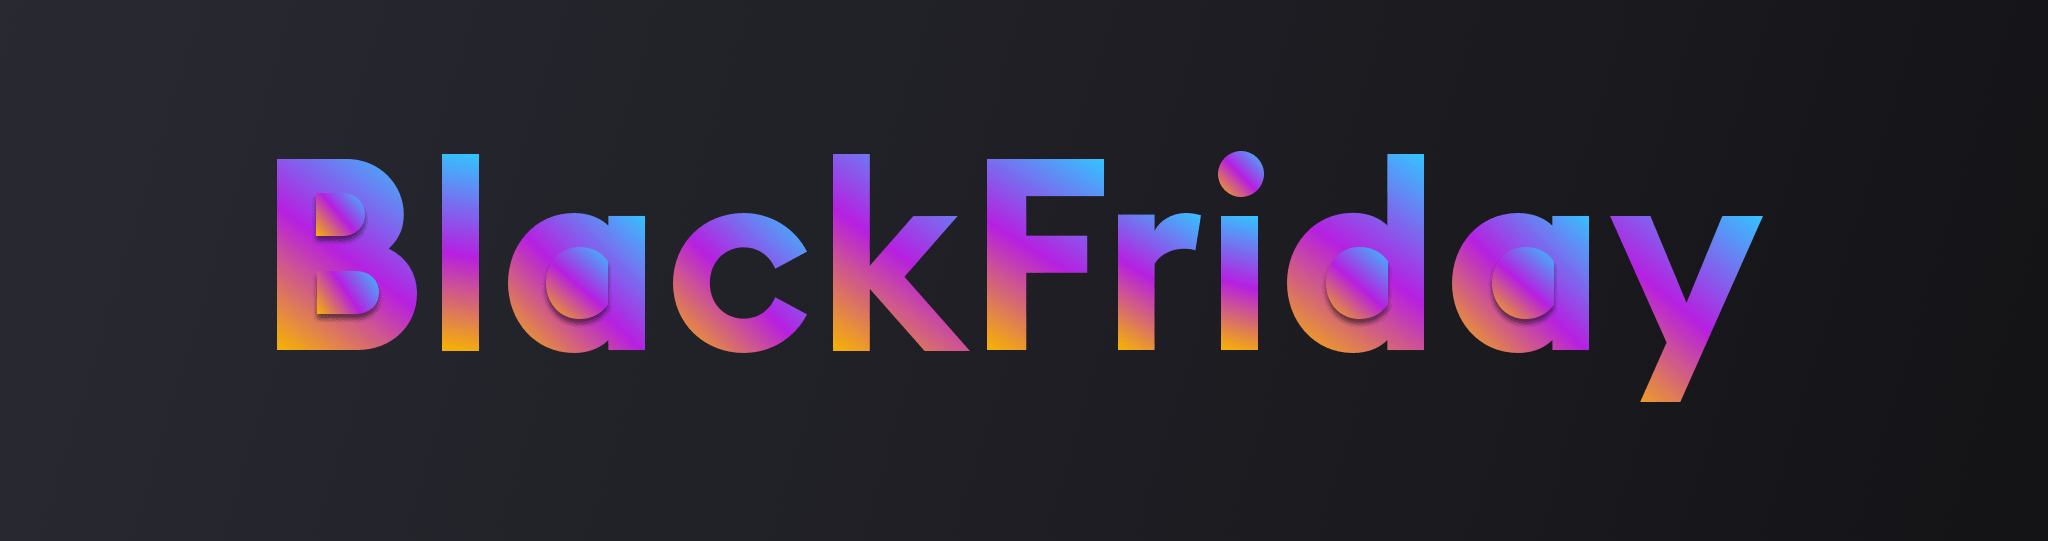 Black Friday at SkyUp: discounts up to 20% and free return of tickets purchased with discounts